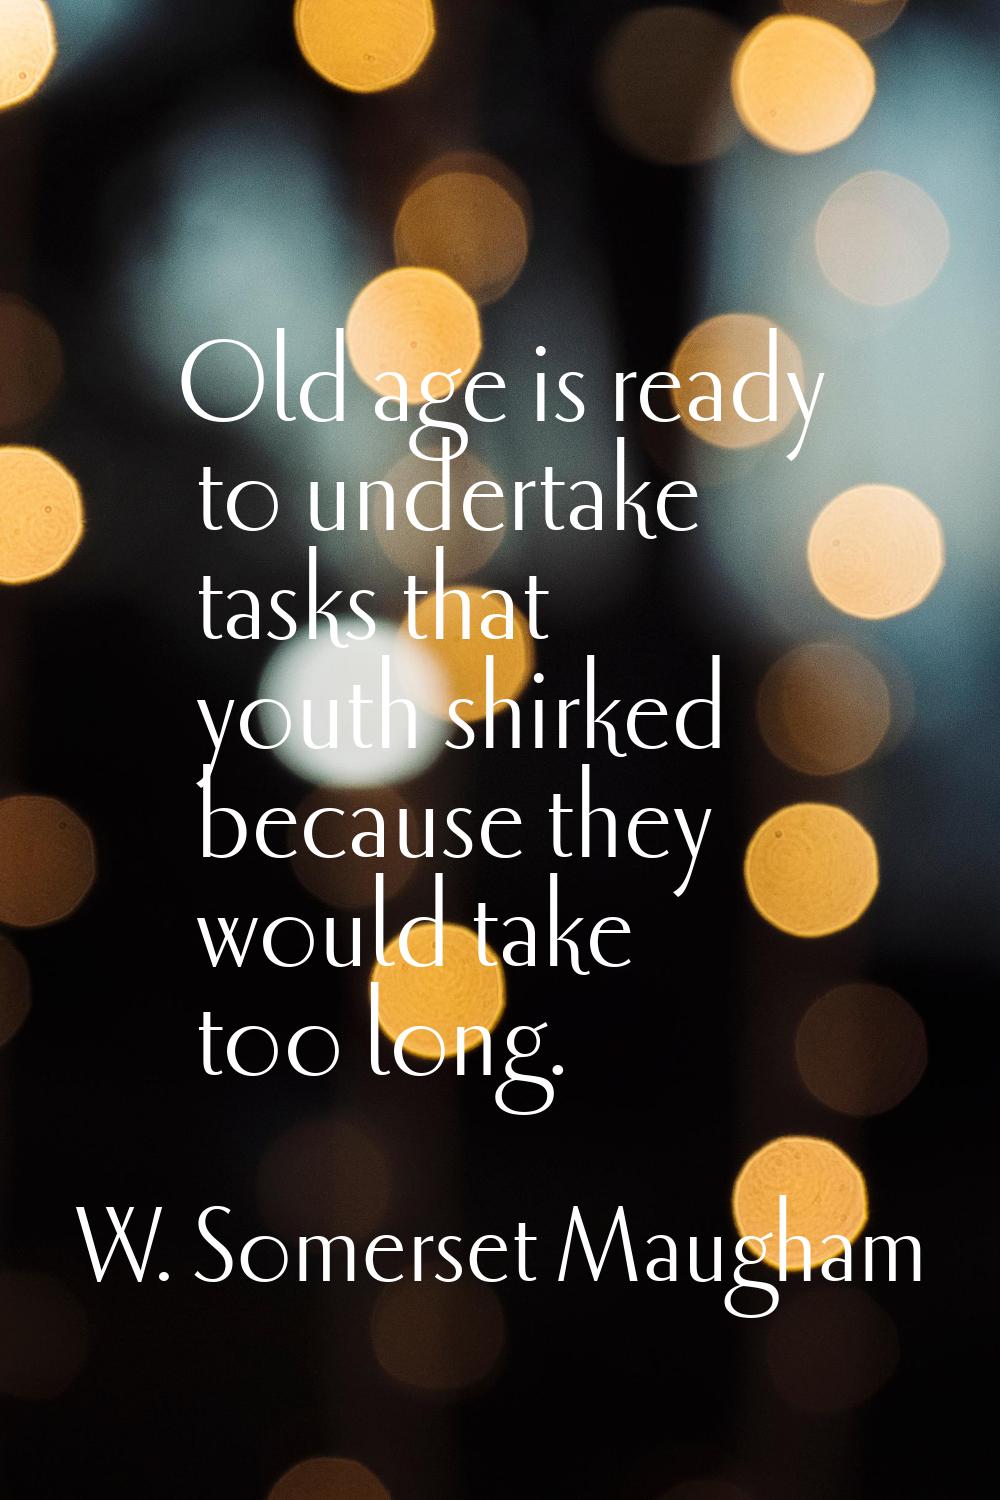 Old age is ready to undertake tasks that youth shirked because they would take too long.